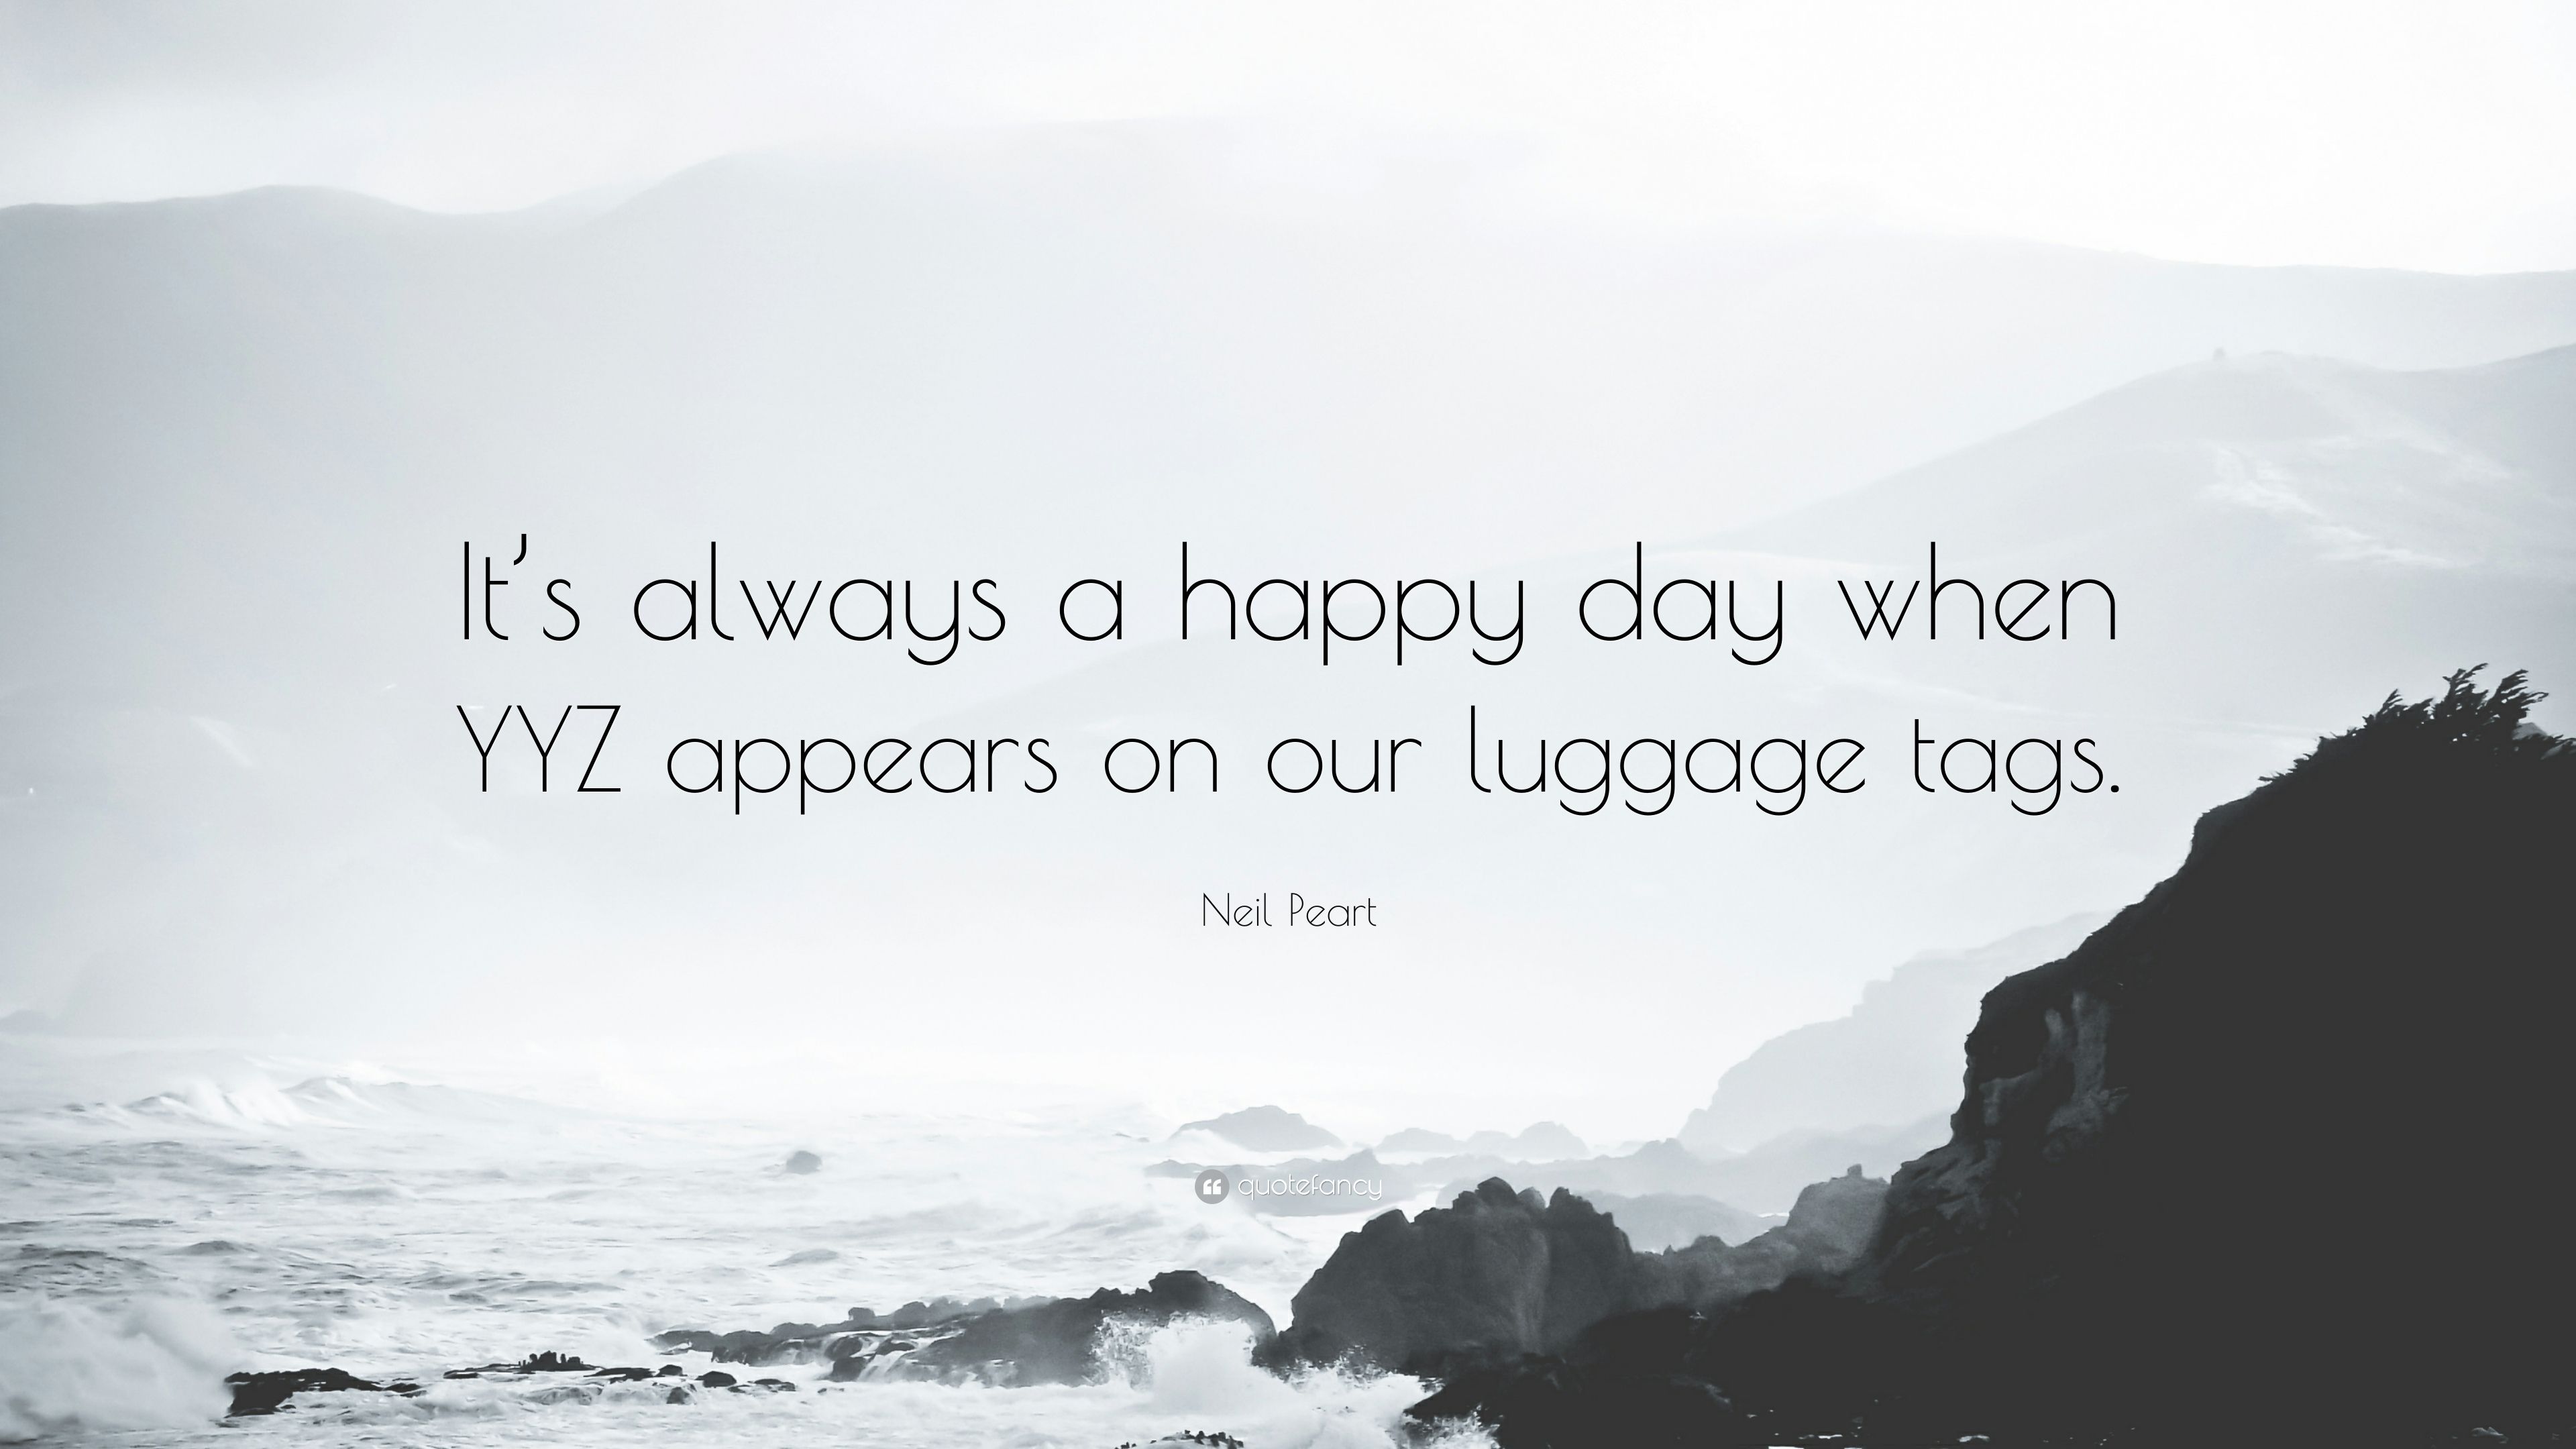 Neil Peart Quote: “It's always a happy day when YYZ appears on our luggage tags.” (10 wallpaper)